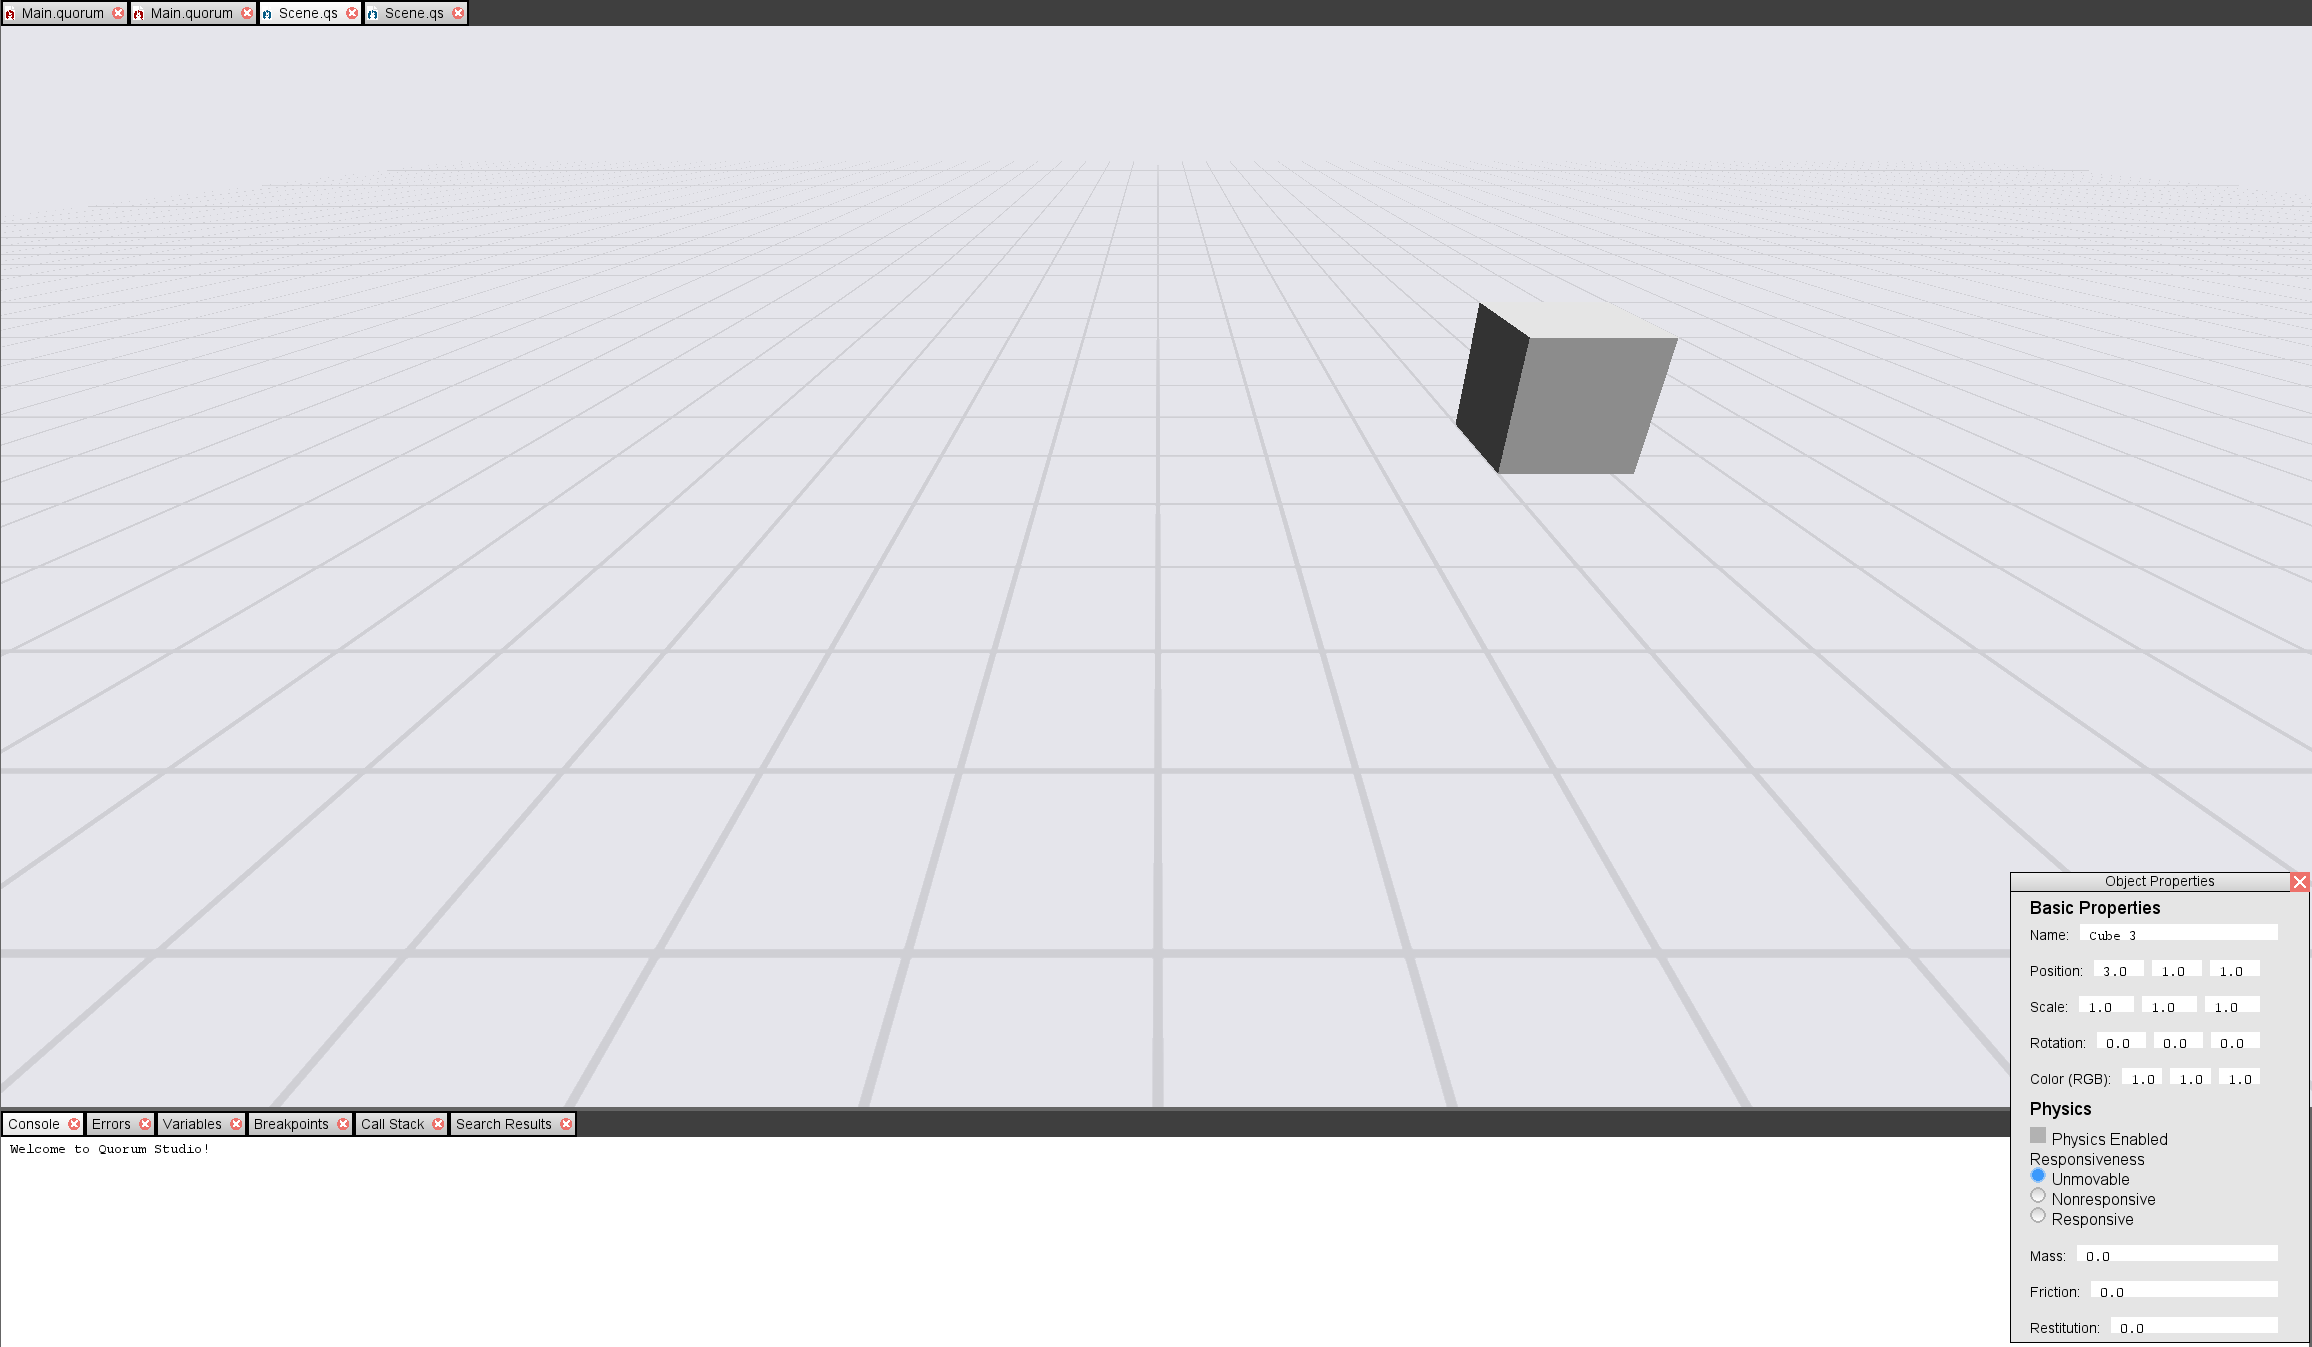 This is an image of just a Cube shape, set slightly to the right of middle of the screen